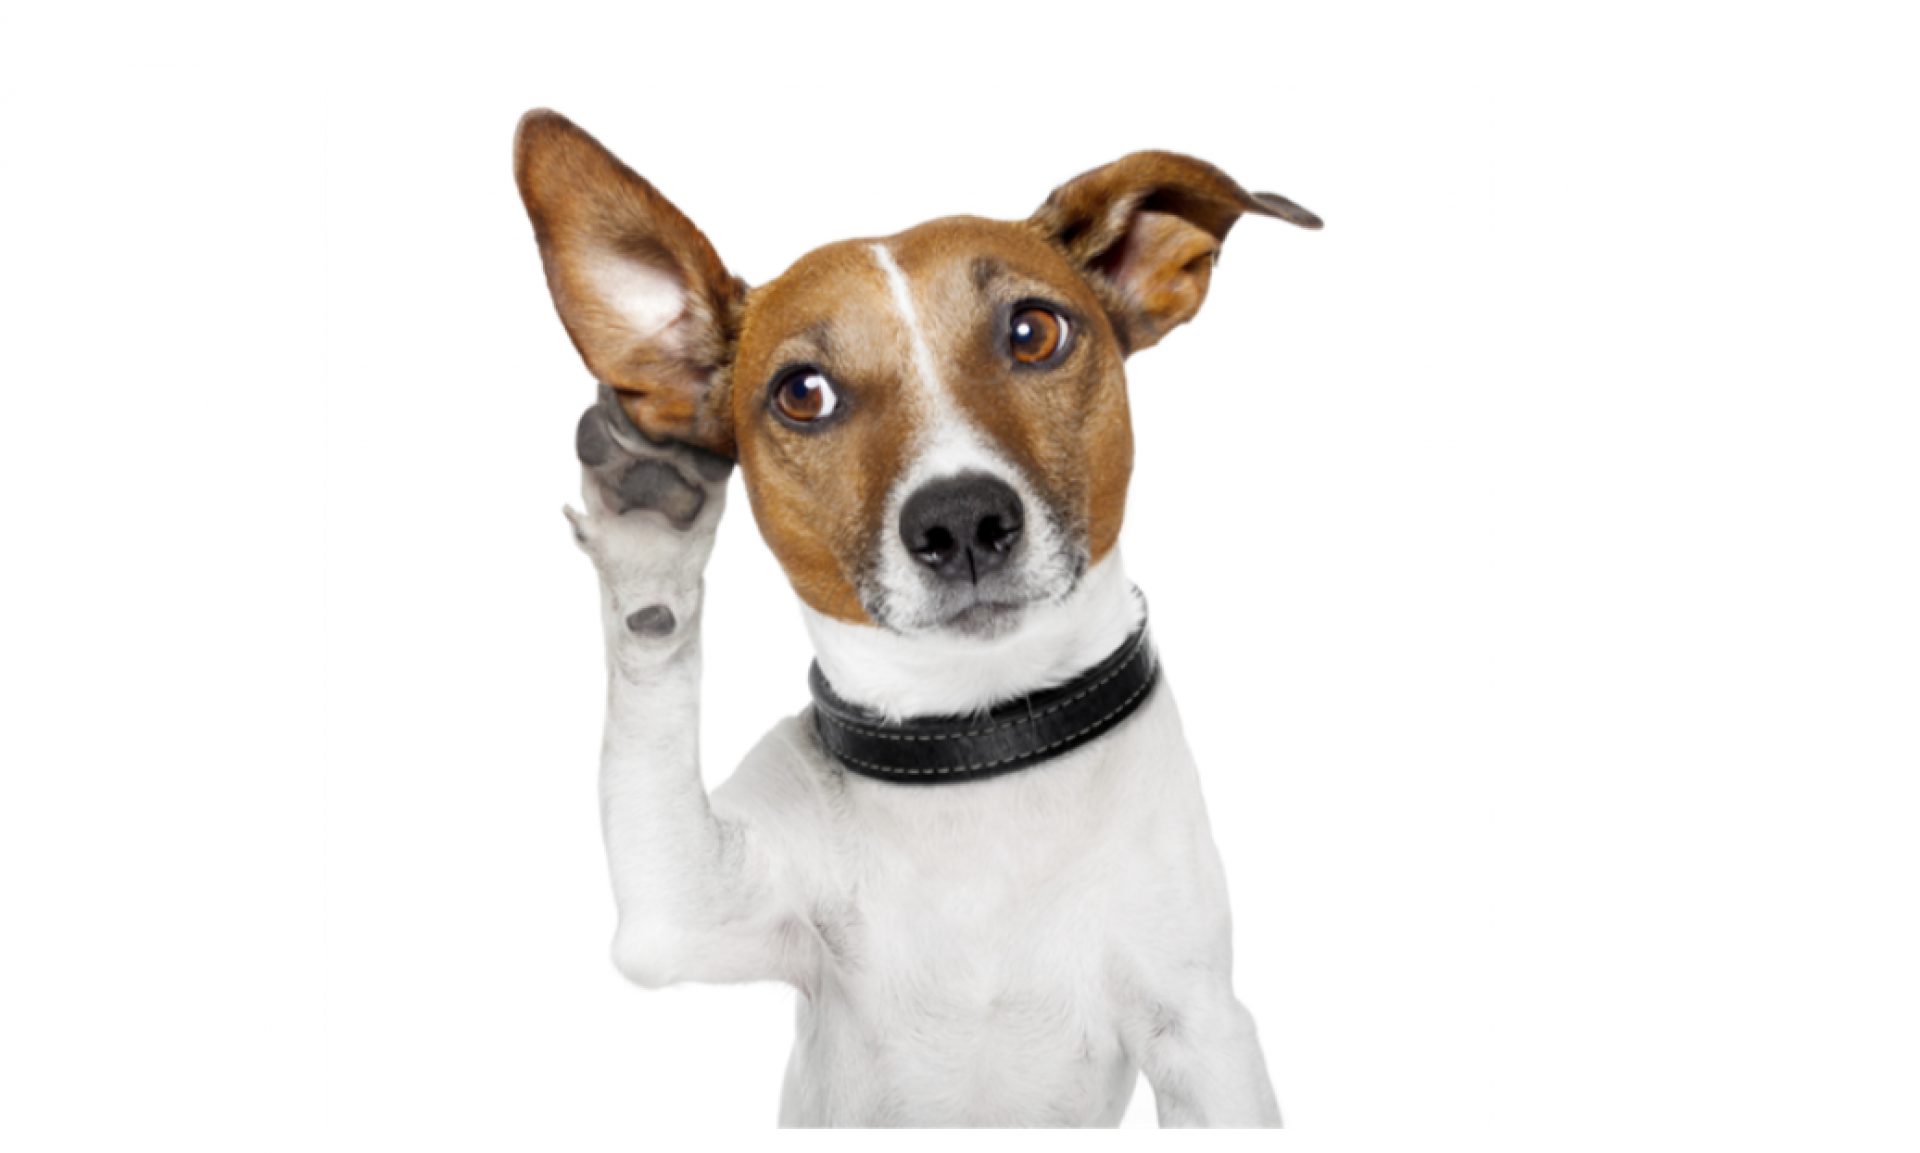 Learn to speak dog! - Raystede Centre for Animal Welfare